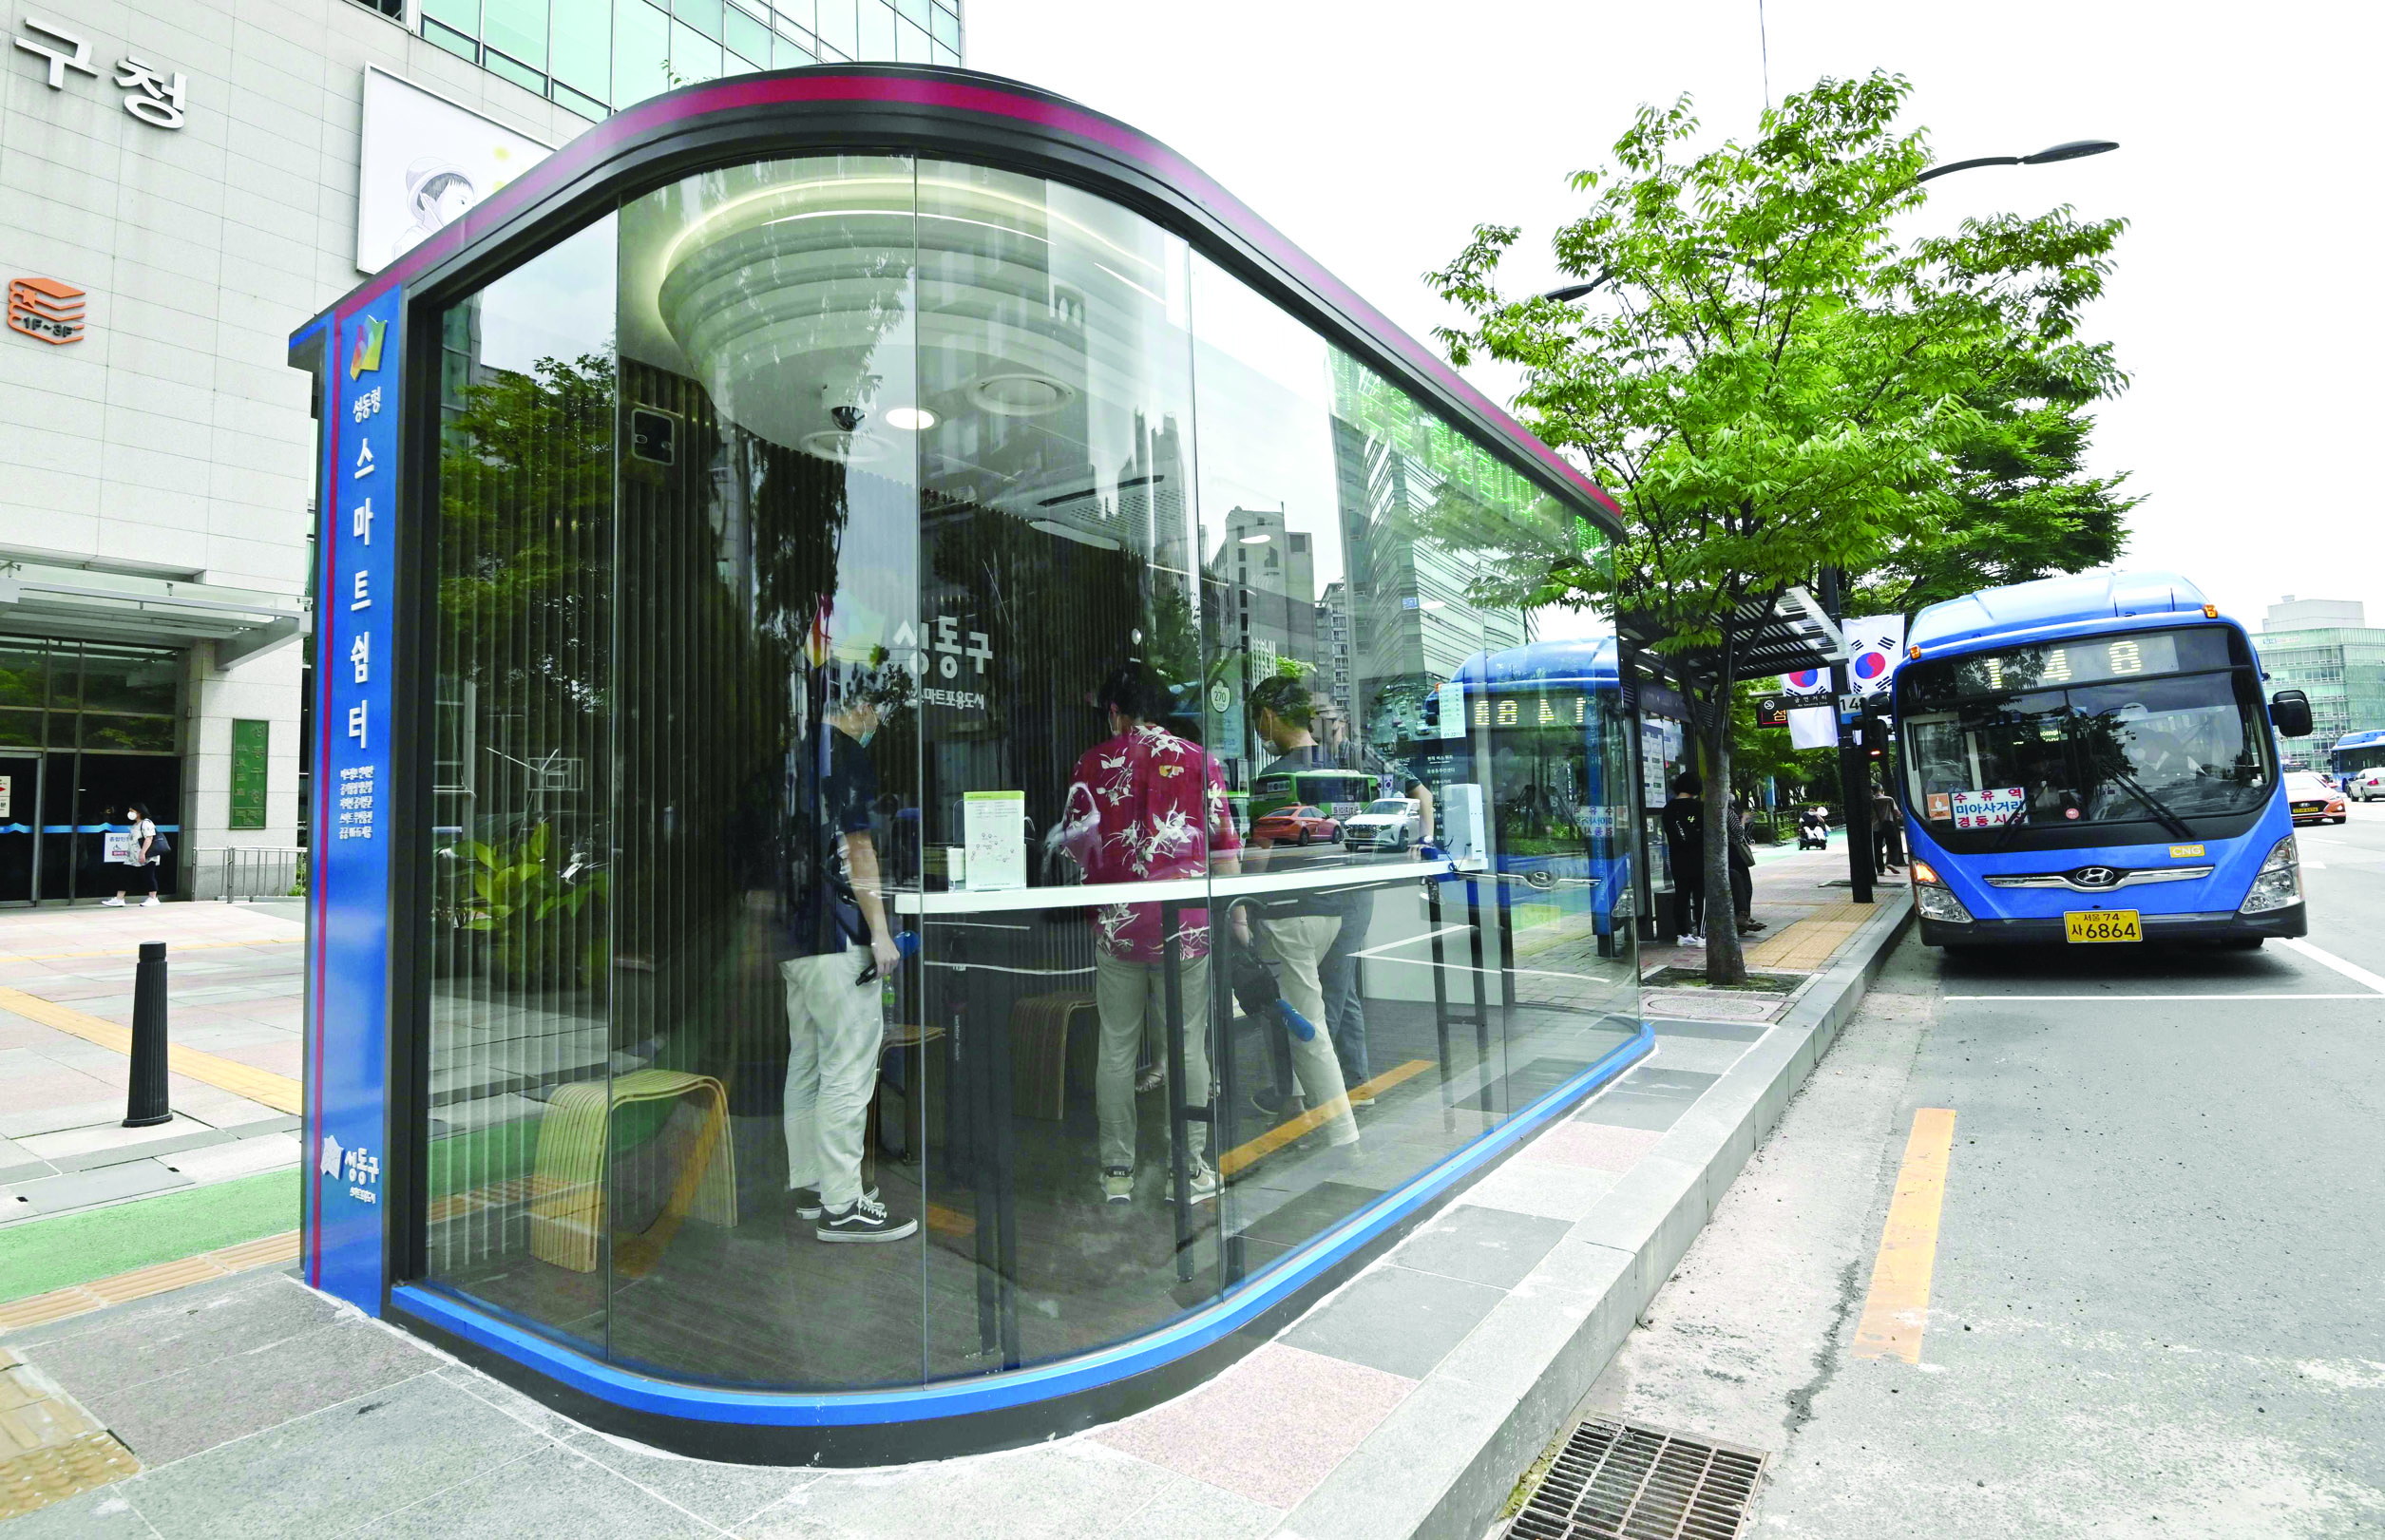 A shelter booth designed to protect passengers from monsoon rains, summer heat and the COVID-19 coronavirus is seen at a bus stop in Seoul on August 12, 2020. - Automatic temperature checks before entry, sliding doors and an air-conditioning system equipped with ultraviolet disinfection lamps -- welcome to high-tech South Korea's latest front in the battle against coronavirus: the bus shelter. (Photo by Jung Yeon-je / AFP)